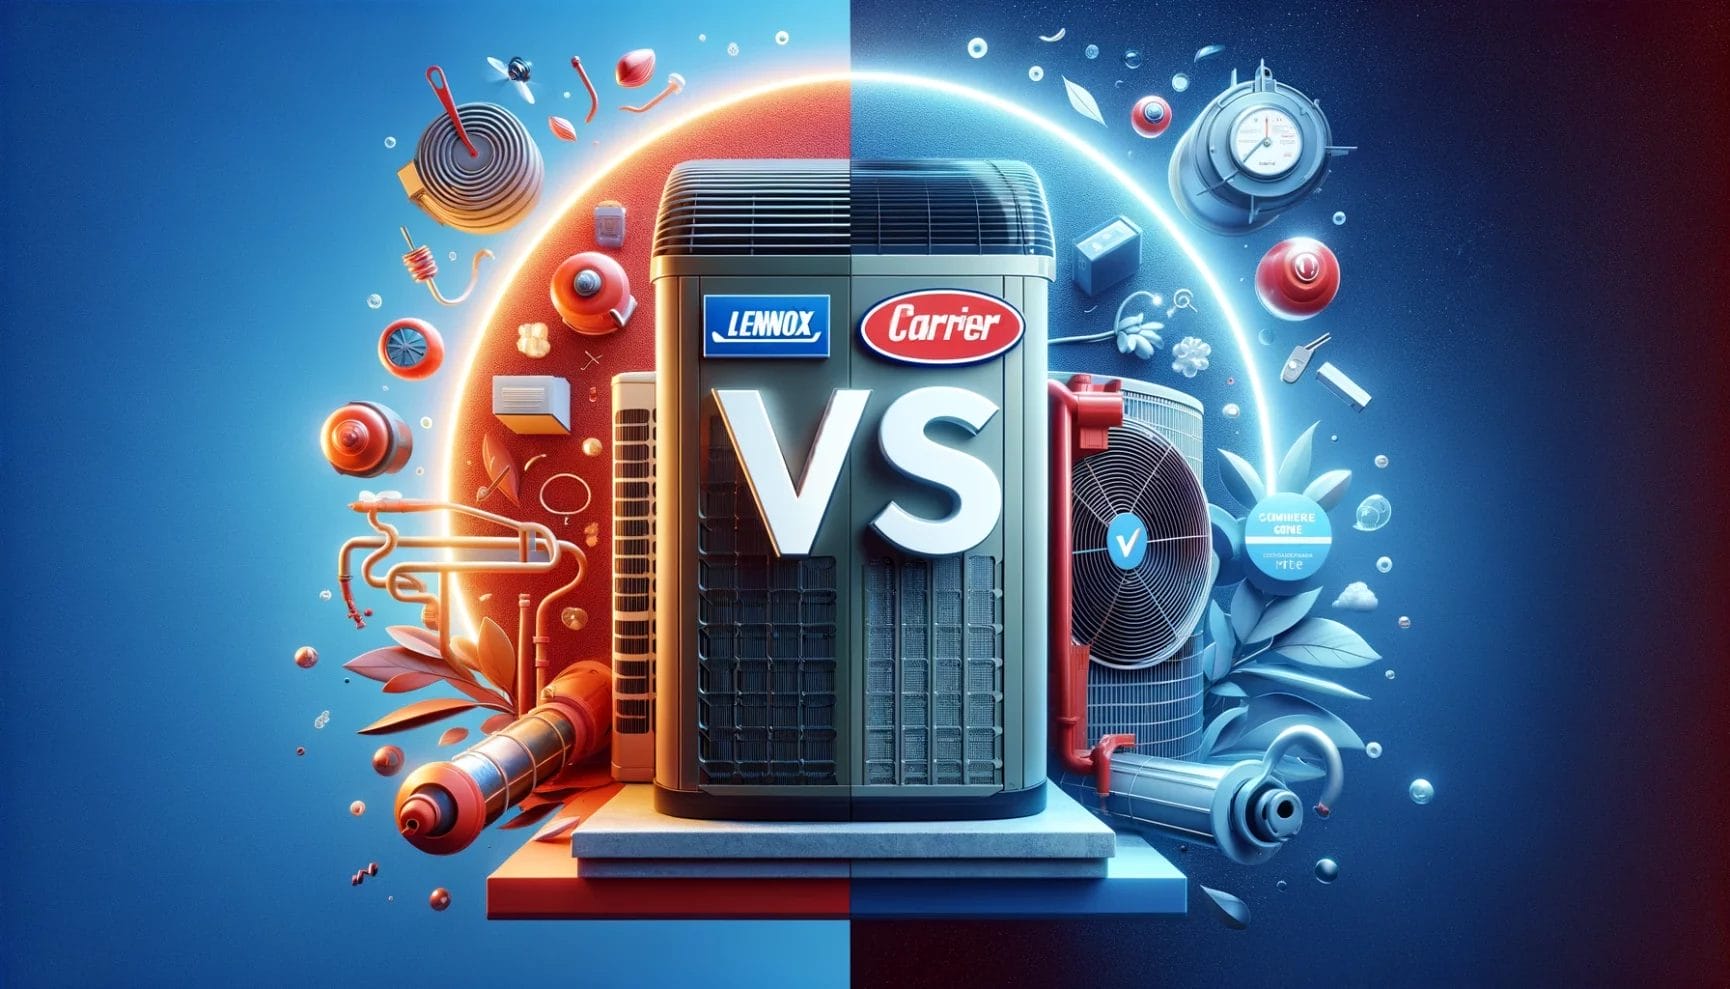 Comparison of lennox and carrier air conditioning units with symbolic elements and a "vs" for versus in the center, suggesting a comparison or competition between the two brands.